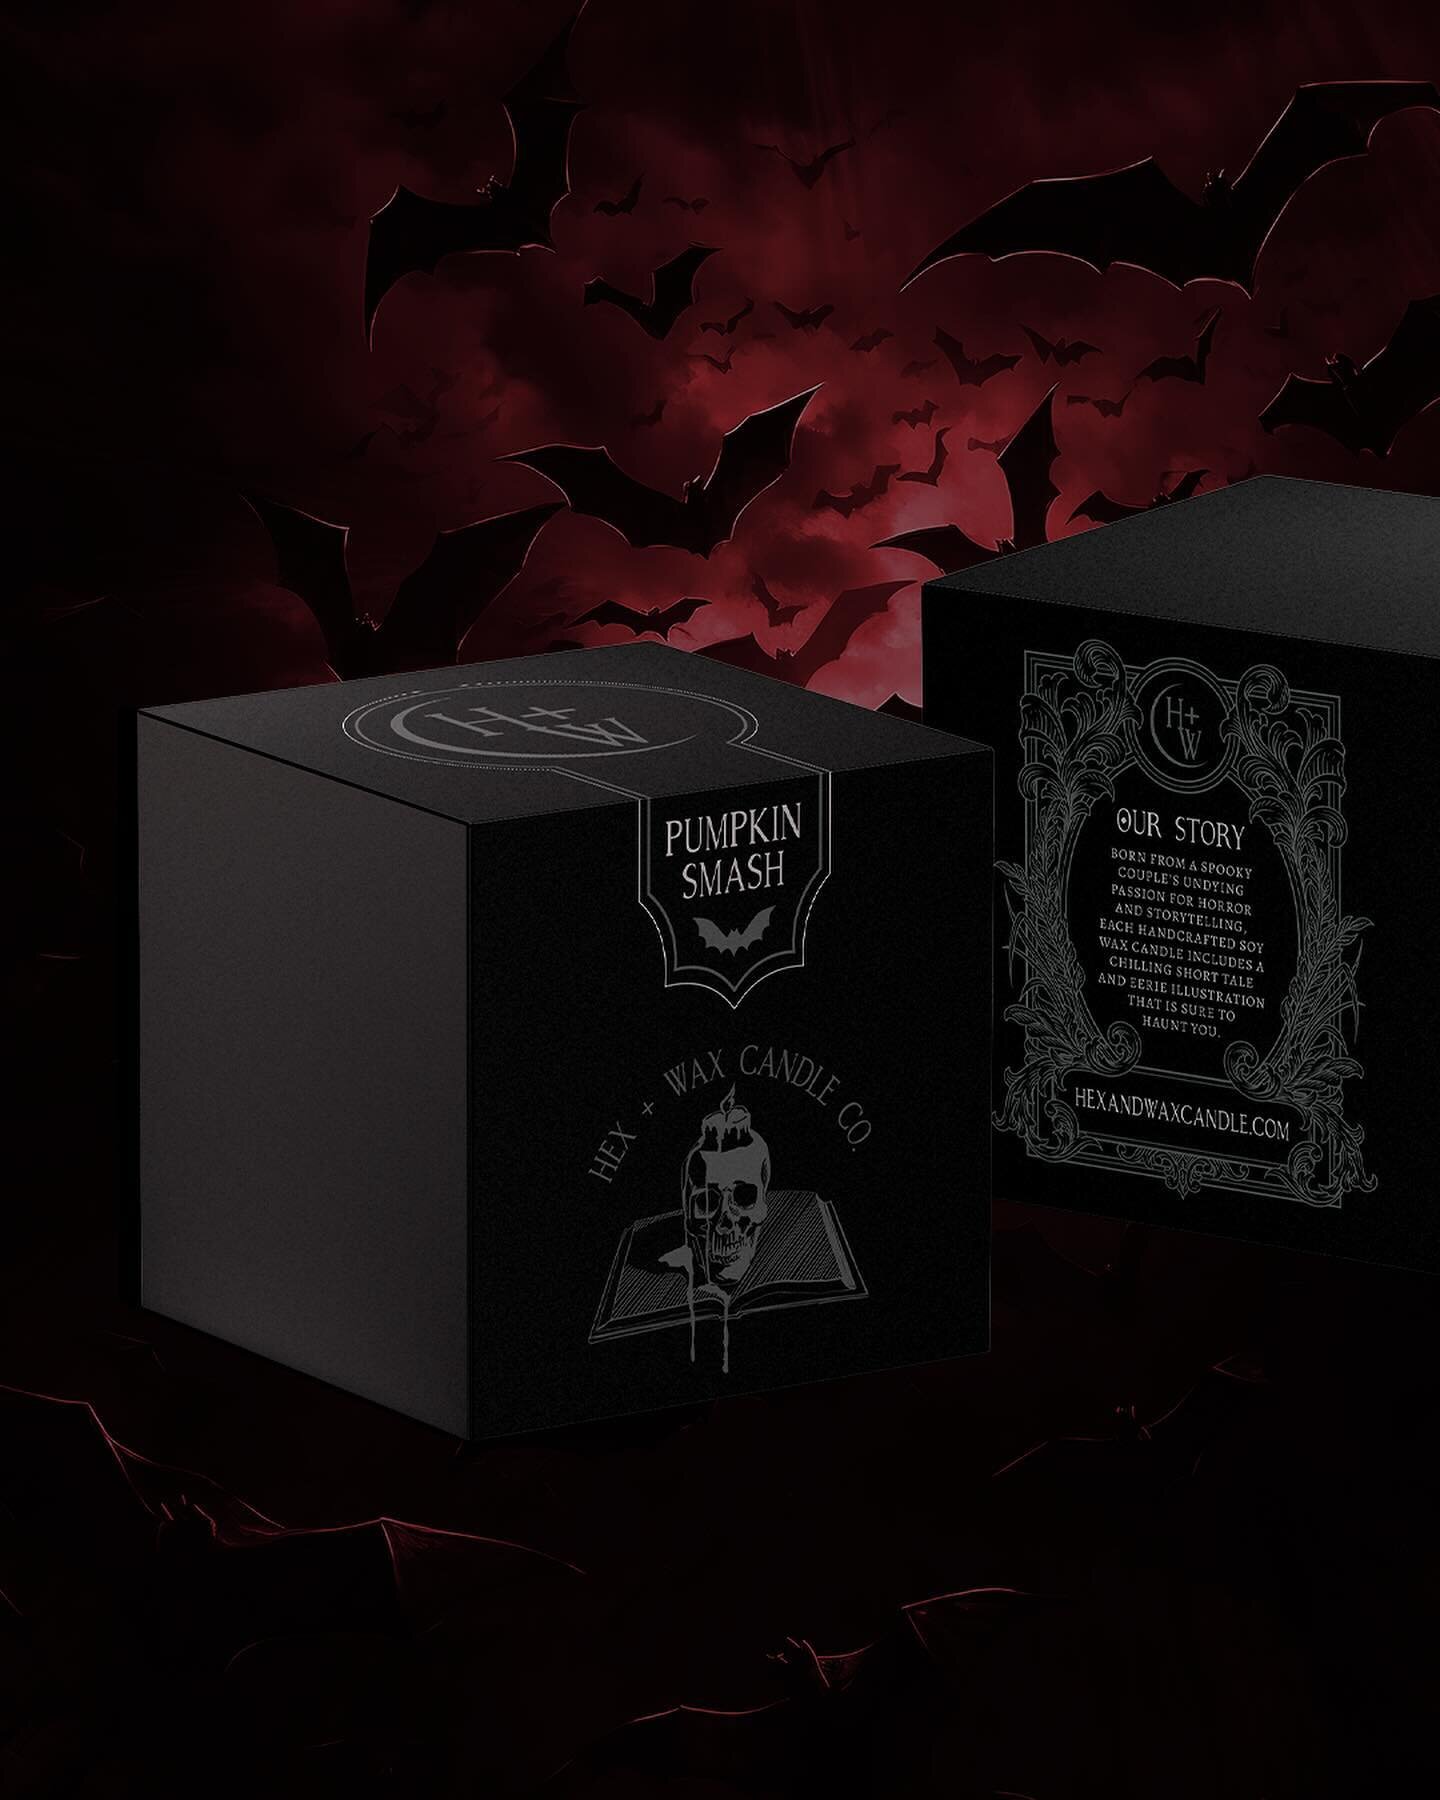 Just because this needs it&rsquo;s own post 🥀 

&ldquo;𝕷𝖊𝖙 𝖒𝖊 𝖙𝖊𝖑𝖑 𝖞𝖔𝖚 𝖆 𝖘𝖙𝖔𝖗𝖞&rdquo; New packaging designed for @hexandwaxcandleco &lsquo;s divine offerings ❤️&zwj;🔥

#wickedbranding #packagingdesign #labeldesign #packagedesigner